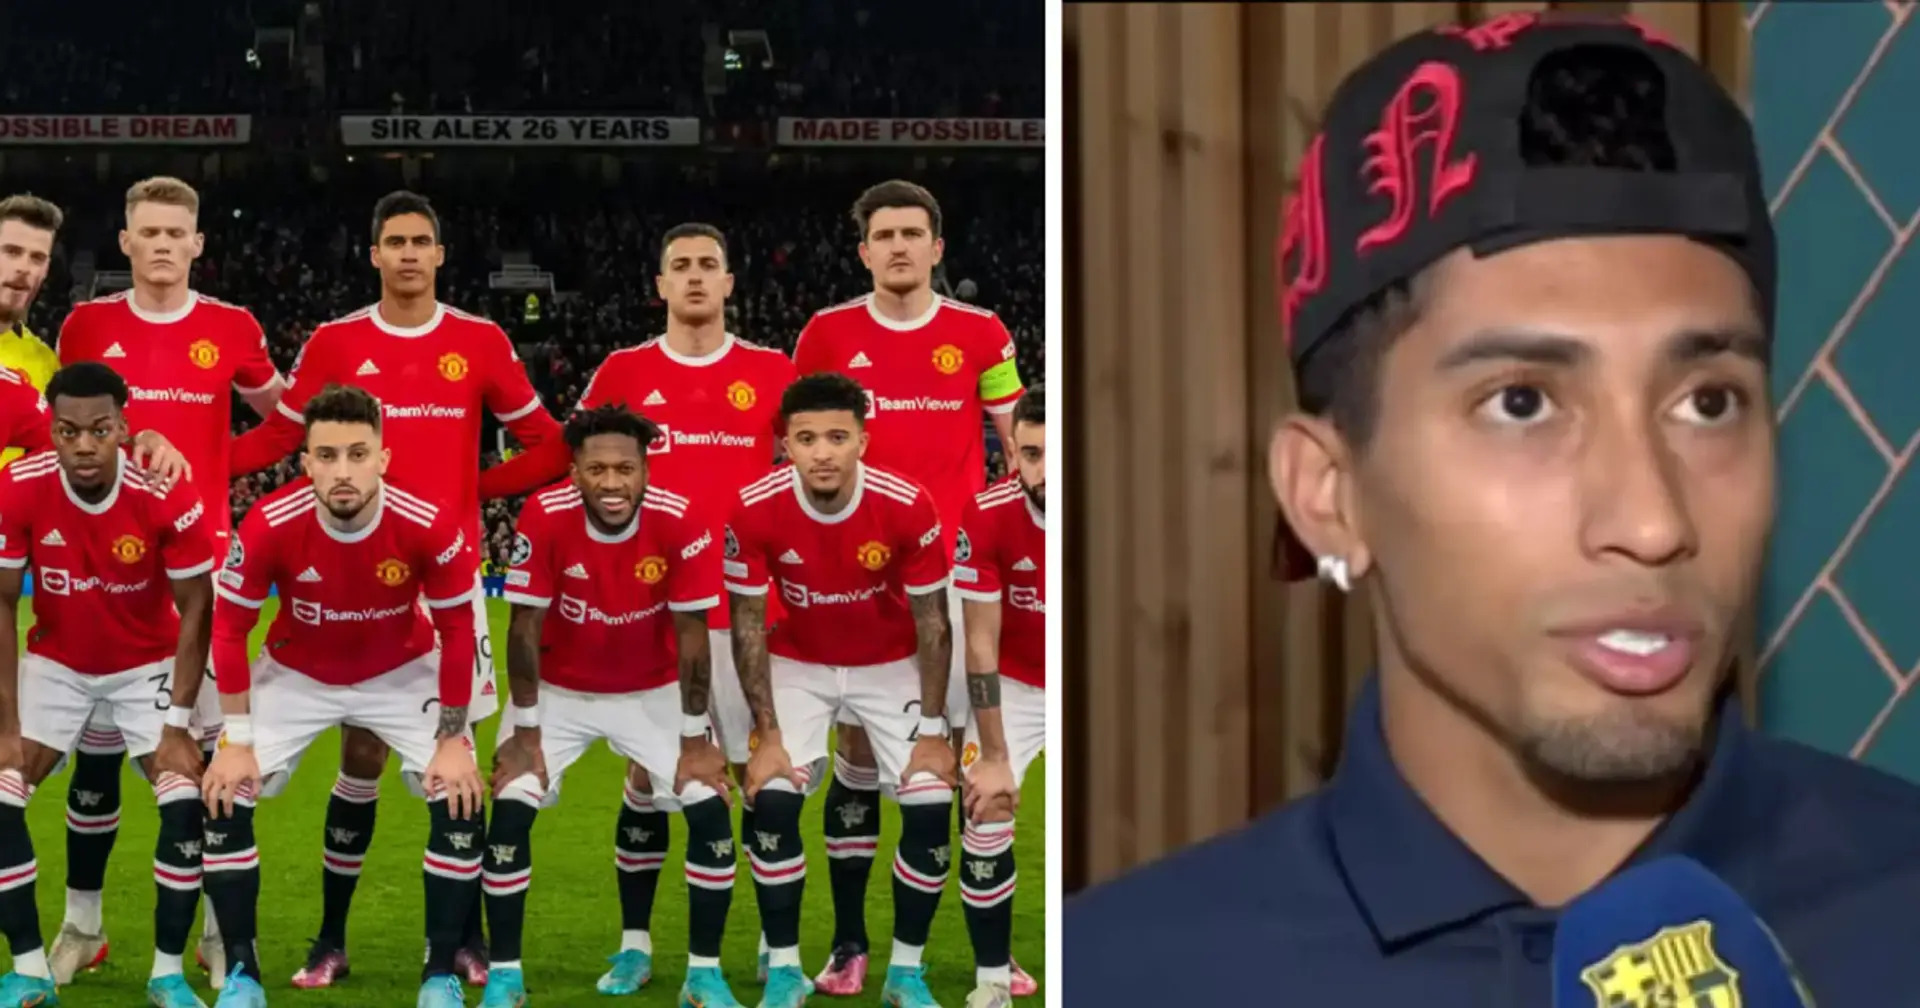 'The guy is so clever': Barca's £60m signing Raphinha says he has an elder brother who plays for Man United